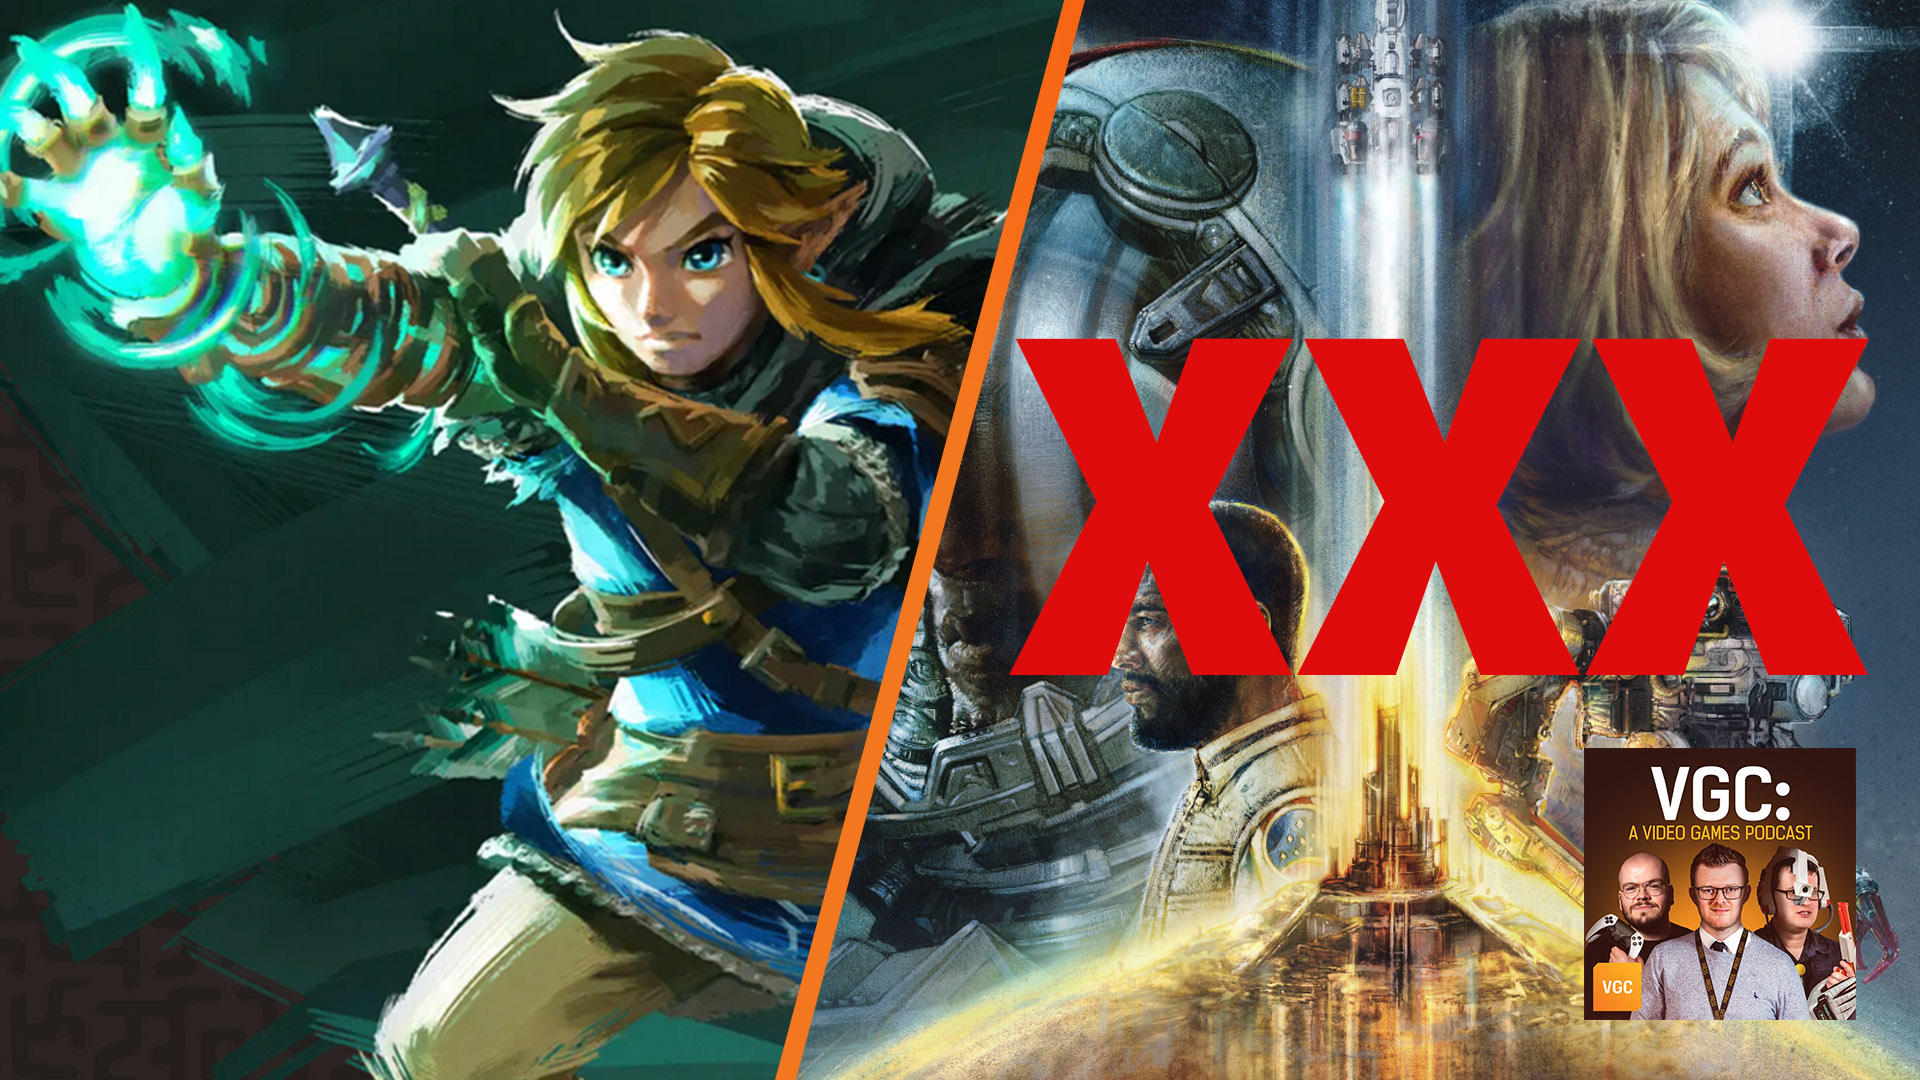 Podcast: Is there anyone on Earth not buying Zelda now? | VGC